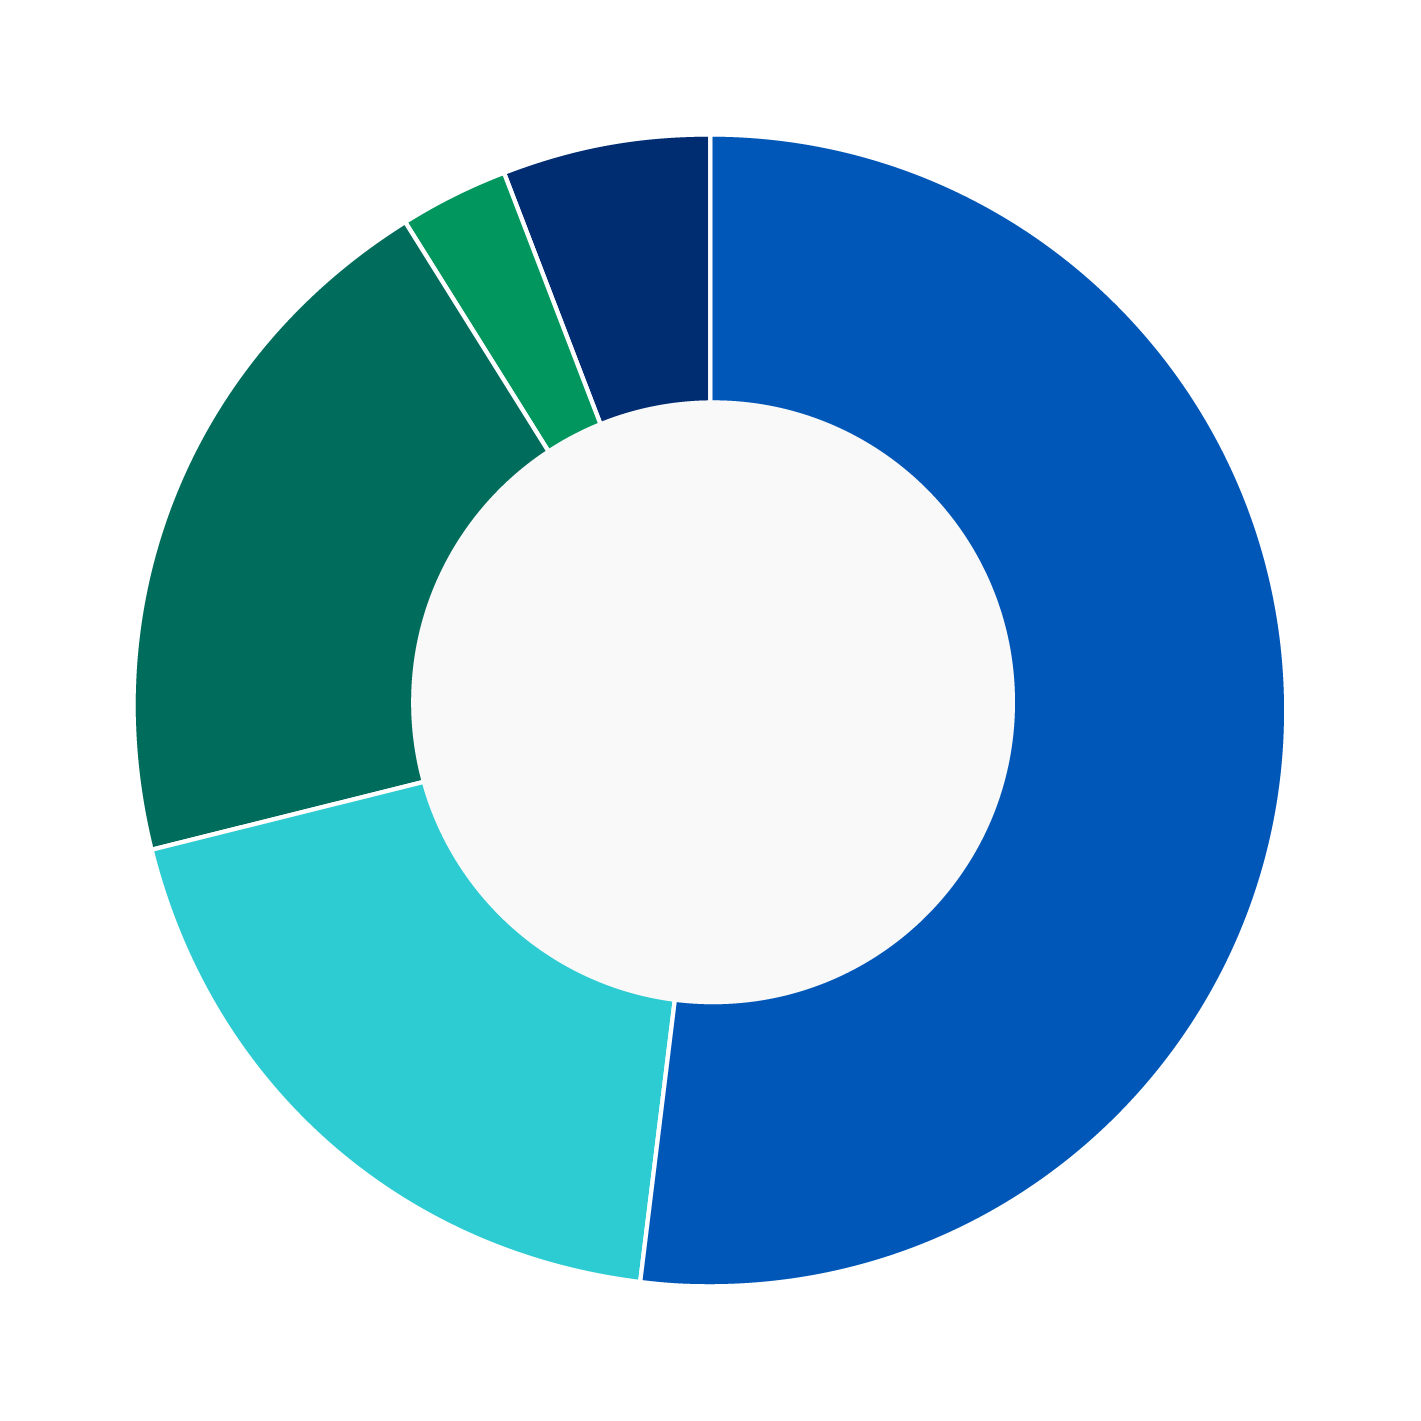 This donut chart shows the percentage of assets allocated to each category as a percentage of the whole.